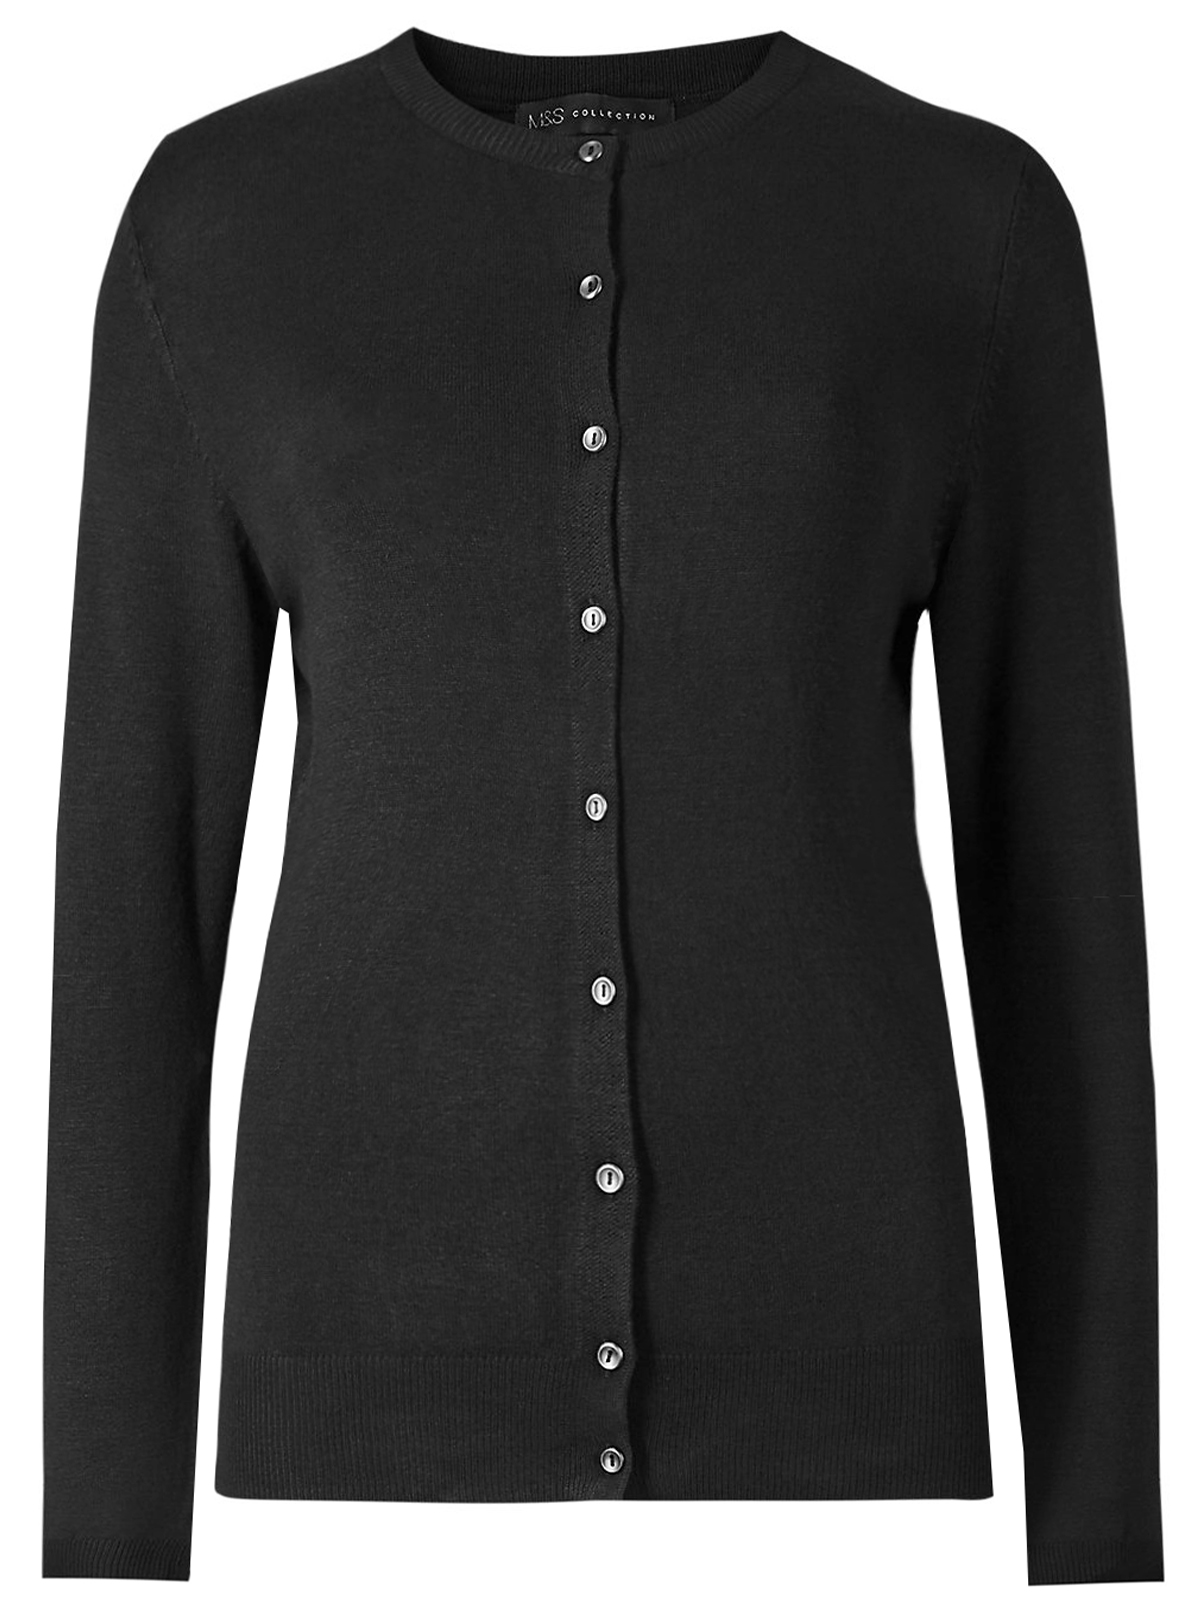 Marks and Spencer - - M&5 BLACK Ribbed Round Neck Button Through ...